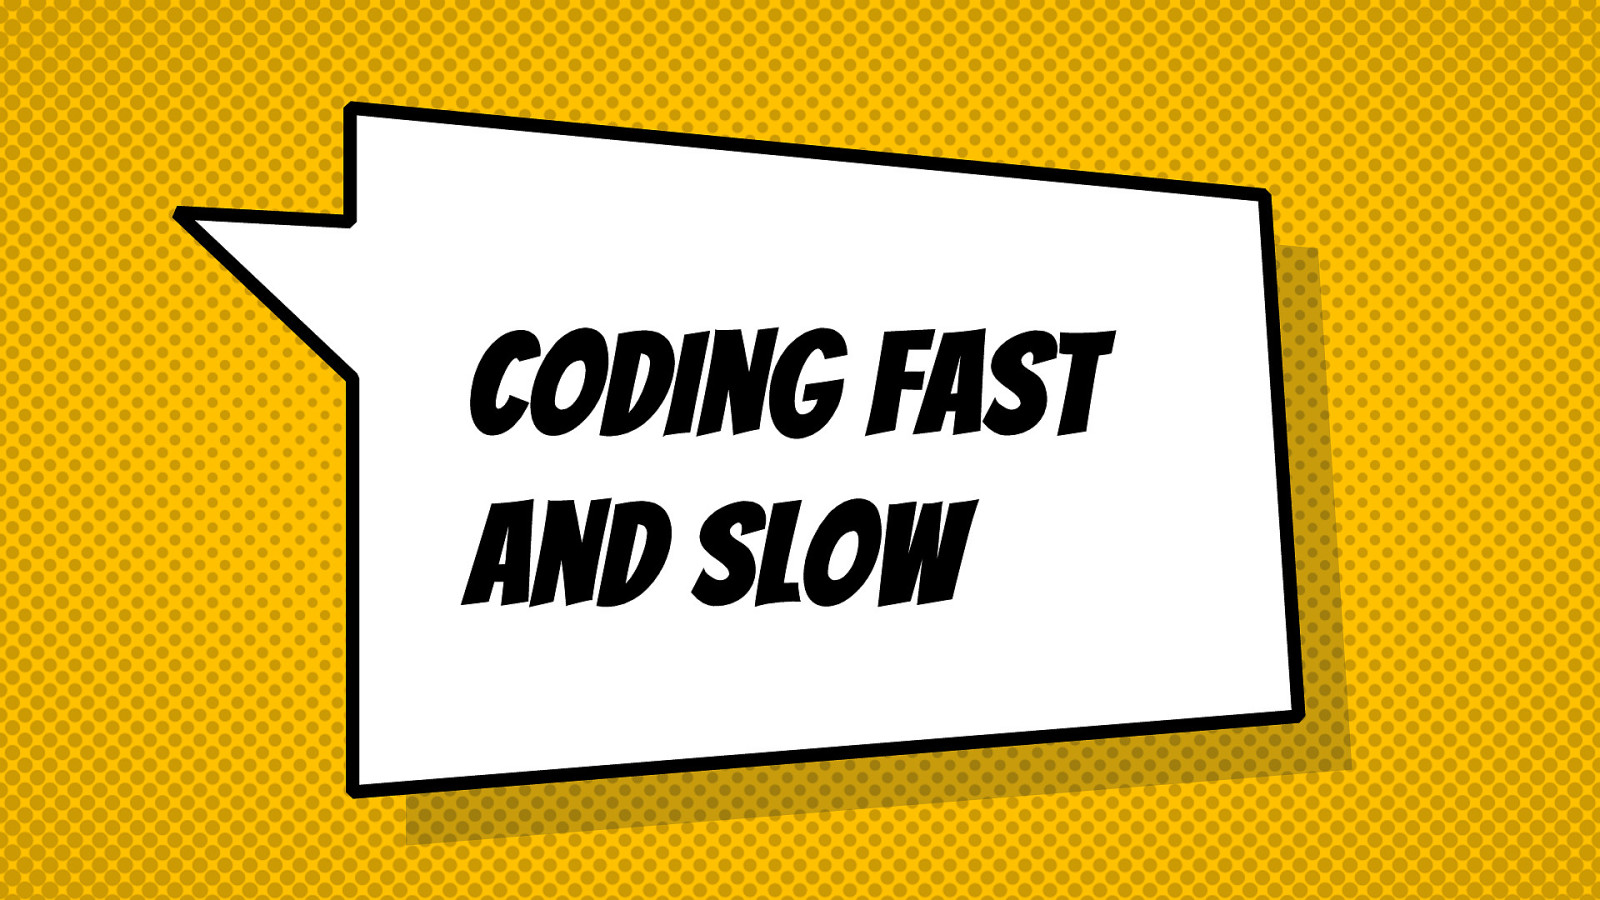 Coding Fast and Slow: Applying Kahneman’s Insights to Improve Development Practices and Efficiency